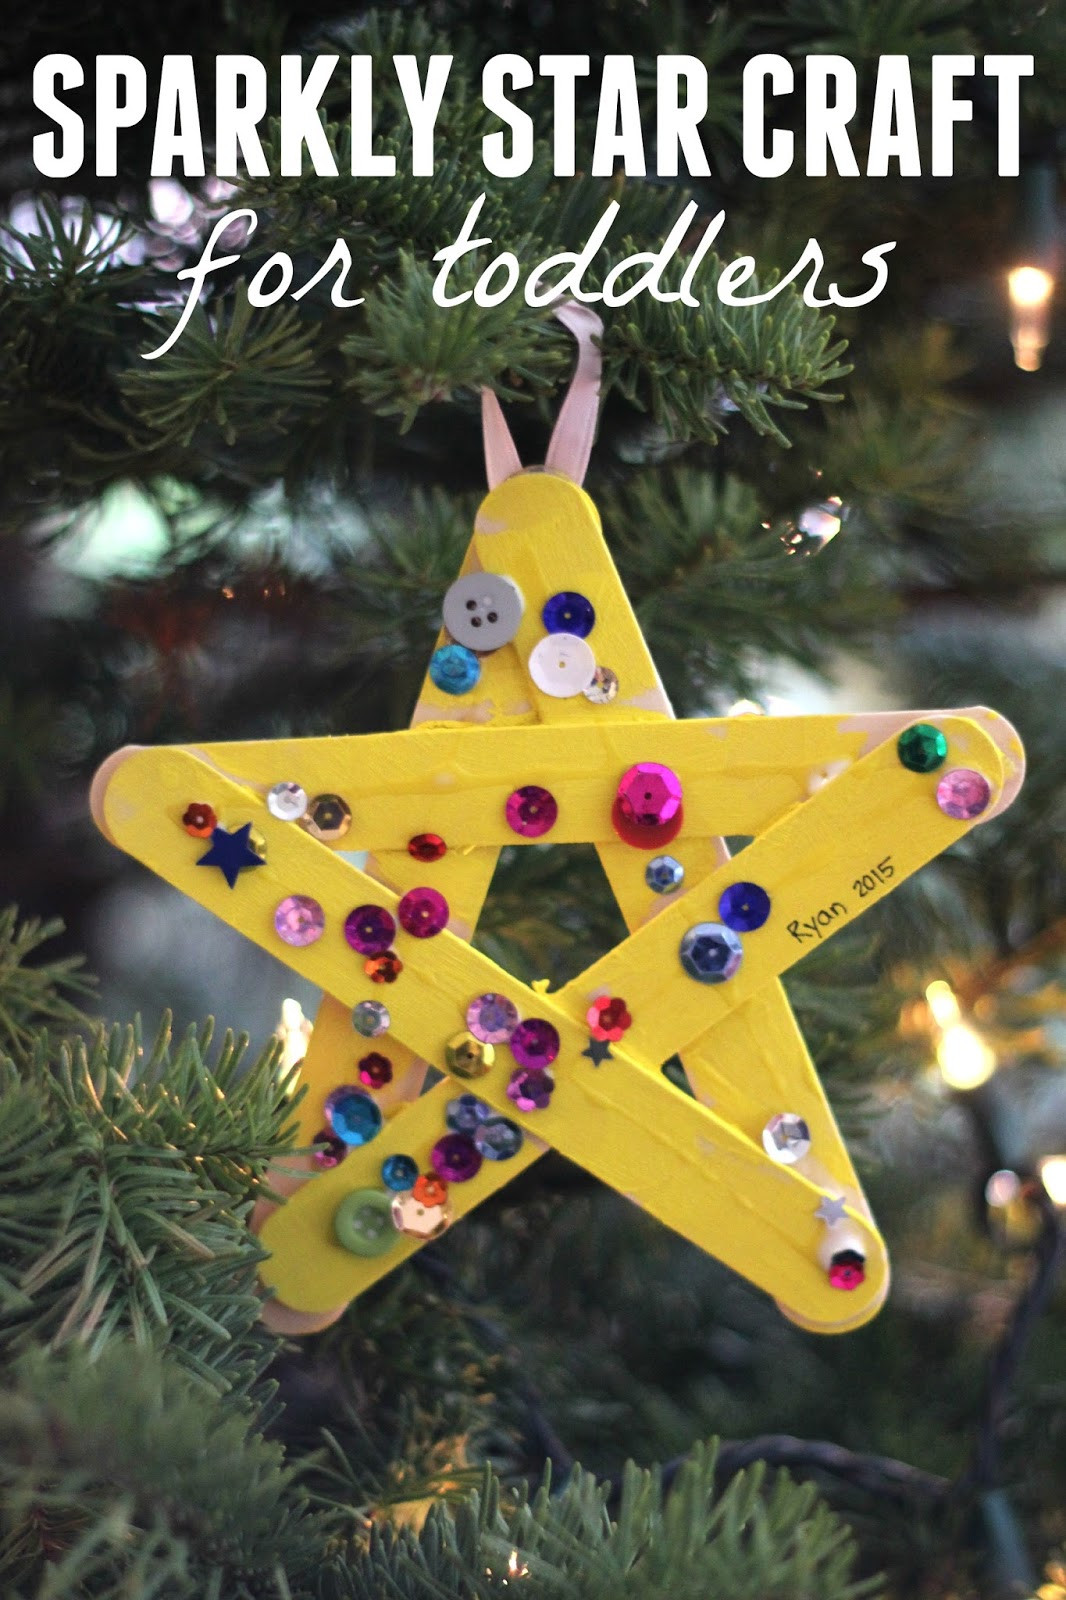 Toddlers Christmas Craft Ideas
 Toddler Approved Sparkly Star Craft for Toddlers